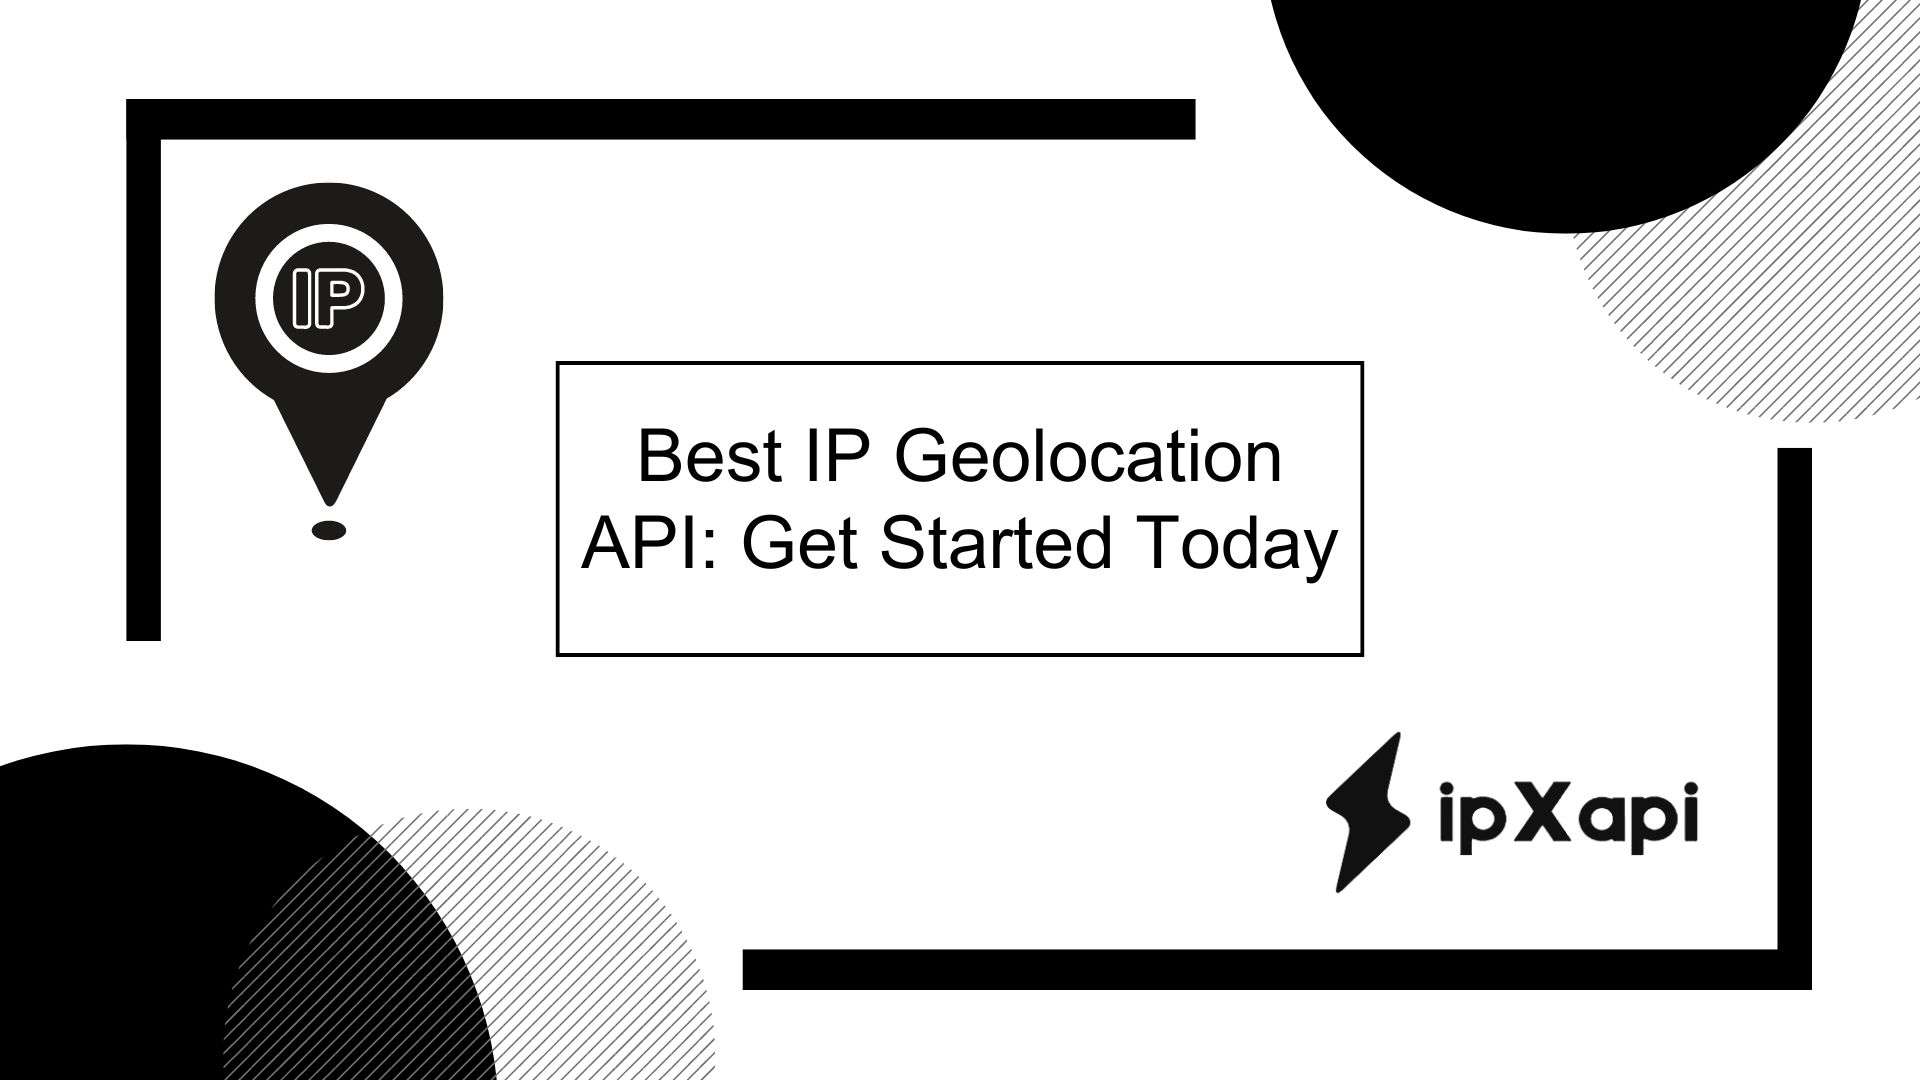 Best IP Geolocation API: Get Started Today